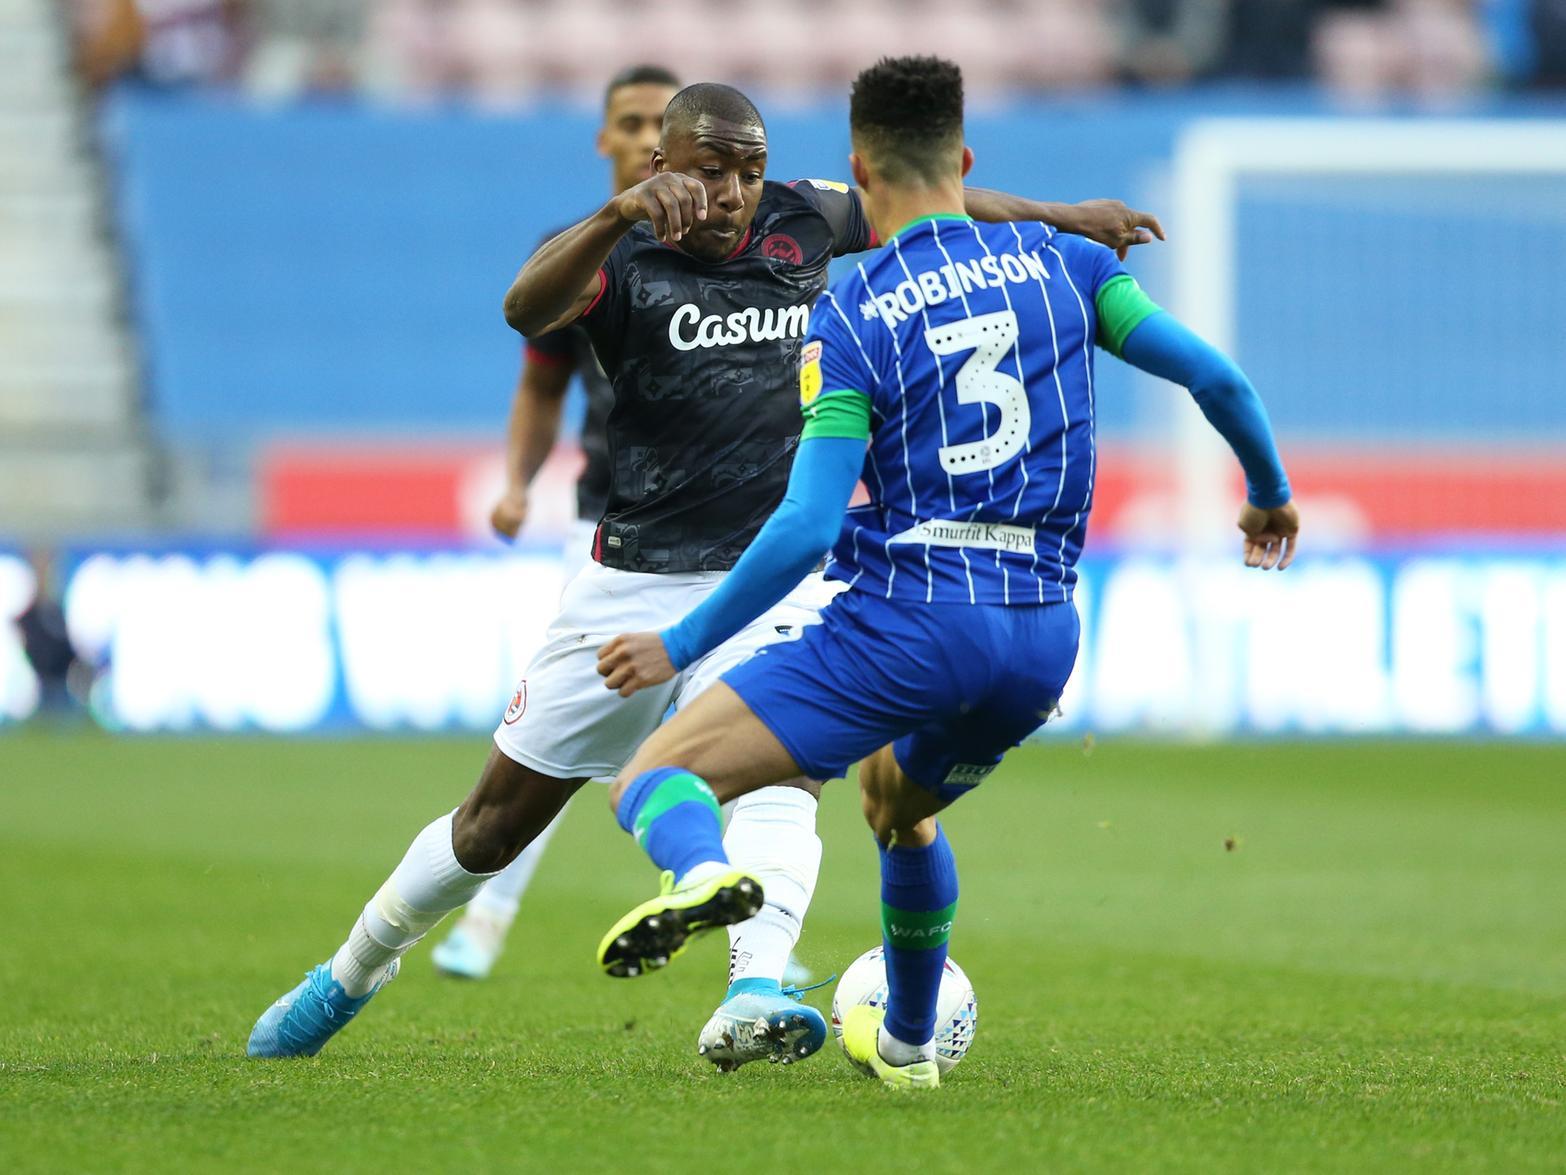 Chelsea are the latest side to be linked with a move for Wigan Athletic sensation Antonee Robinson, after the right-back saw a deadline day move to AC Milan fall through last month. (Daily Mirror)